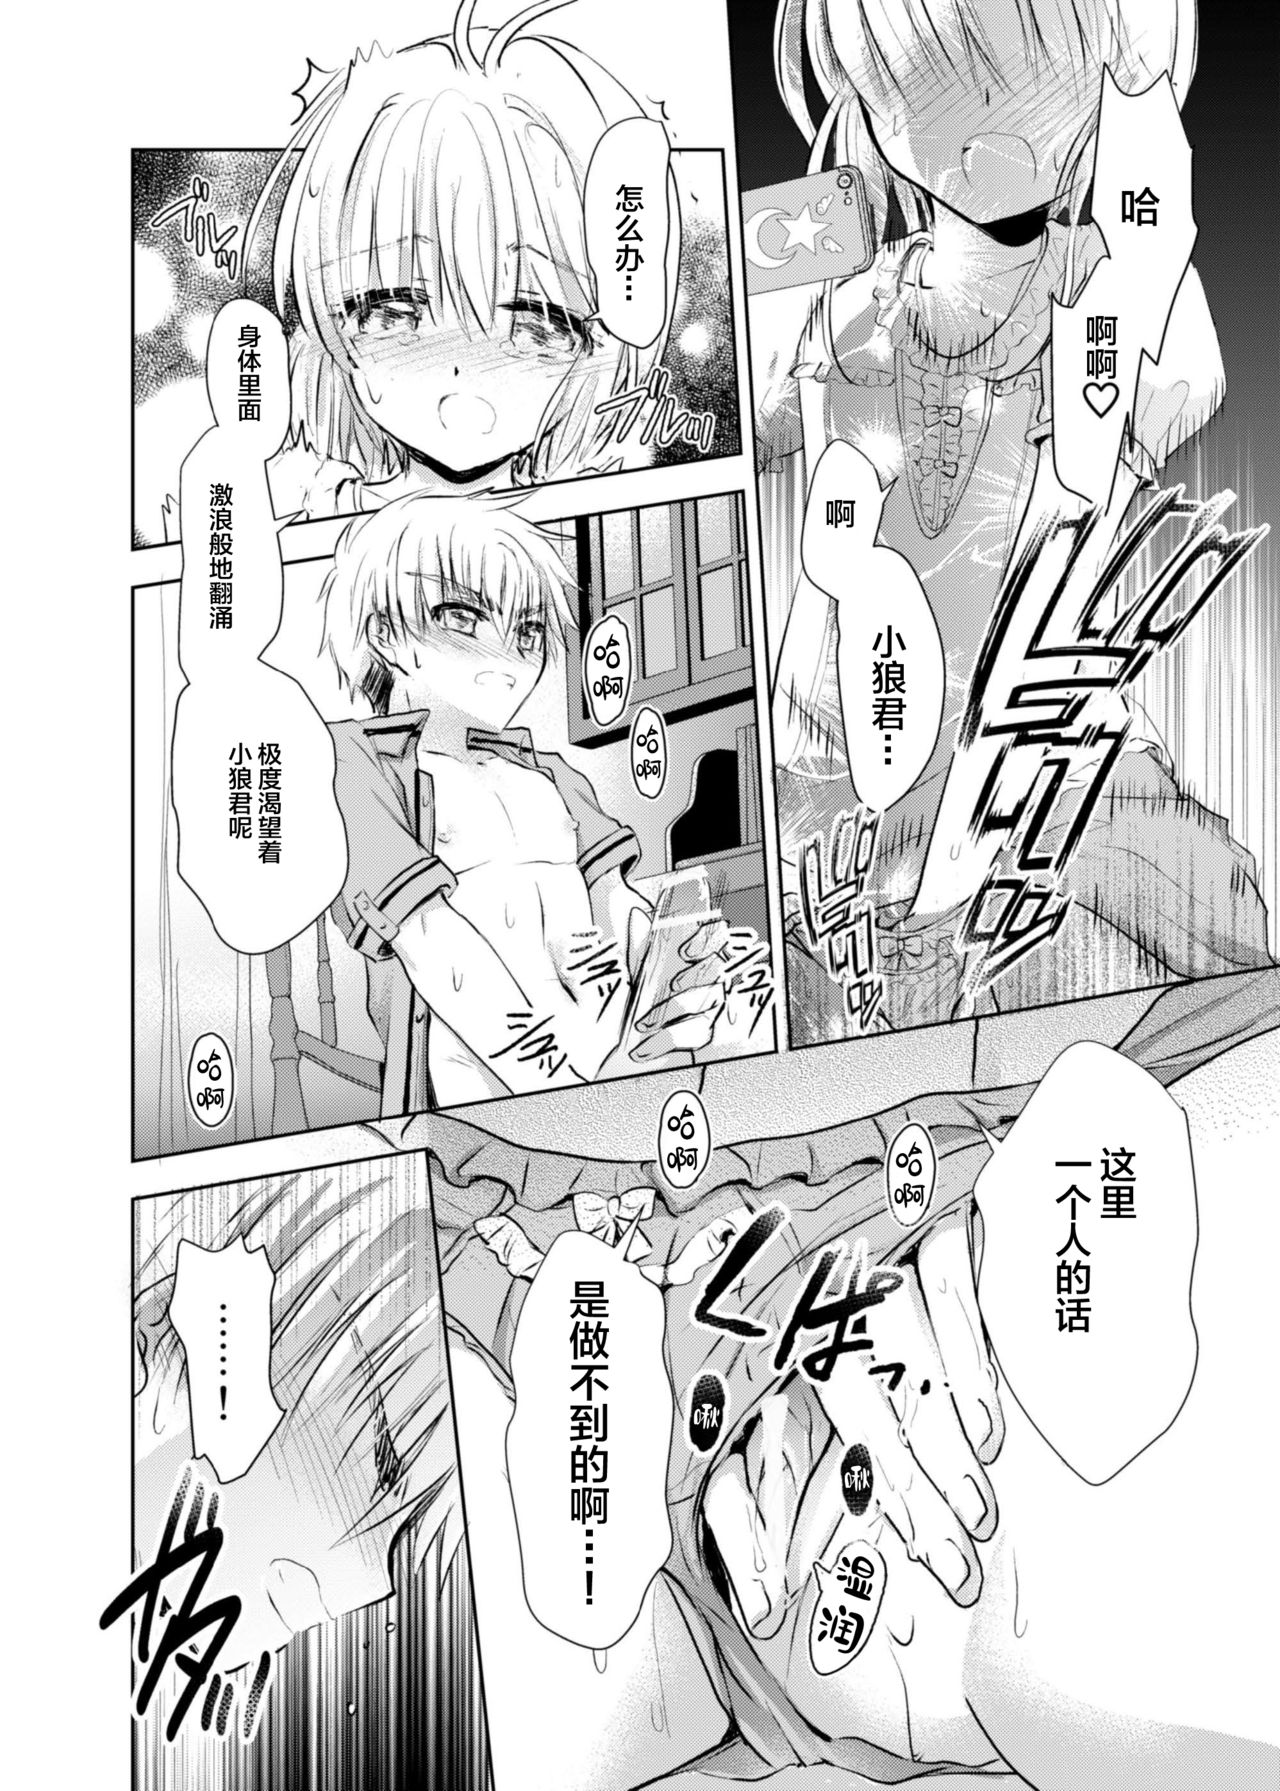 [Maple of Forest (Kaede Sago)] Give and Take (Cardcaptor Sakura) [Chinese] [新桥月白日语社] [Digital] page 23 full